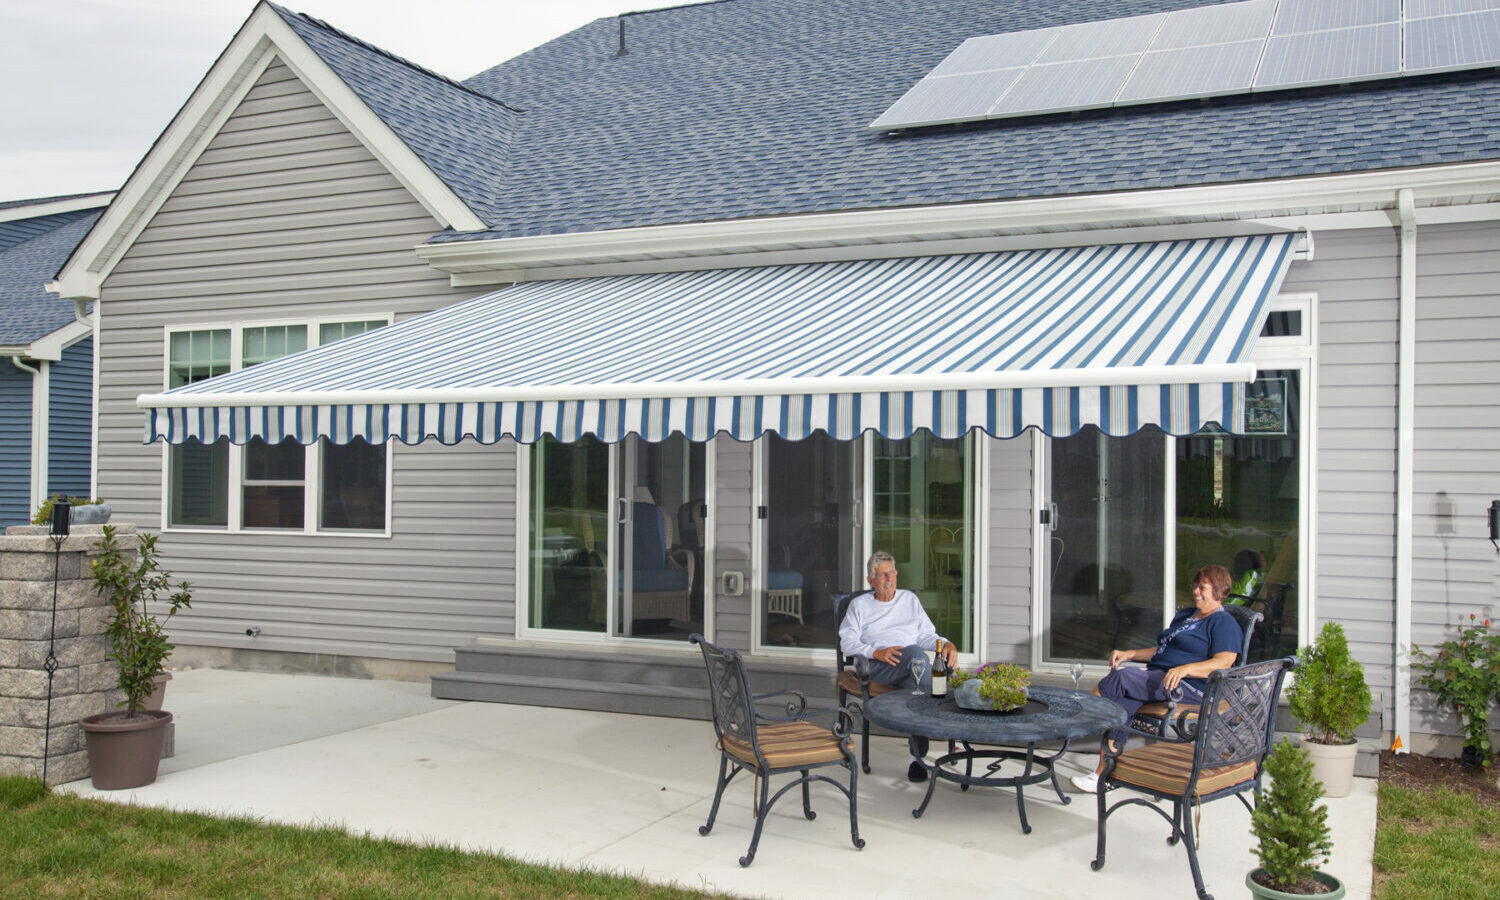 Picture of awning opened covering patio